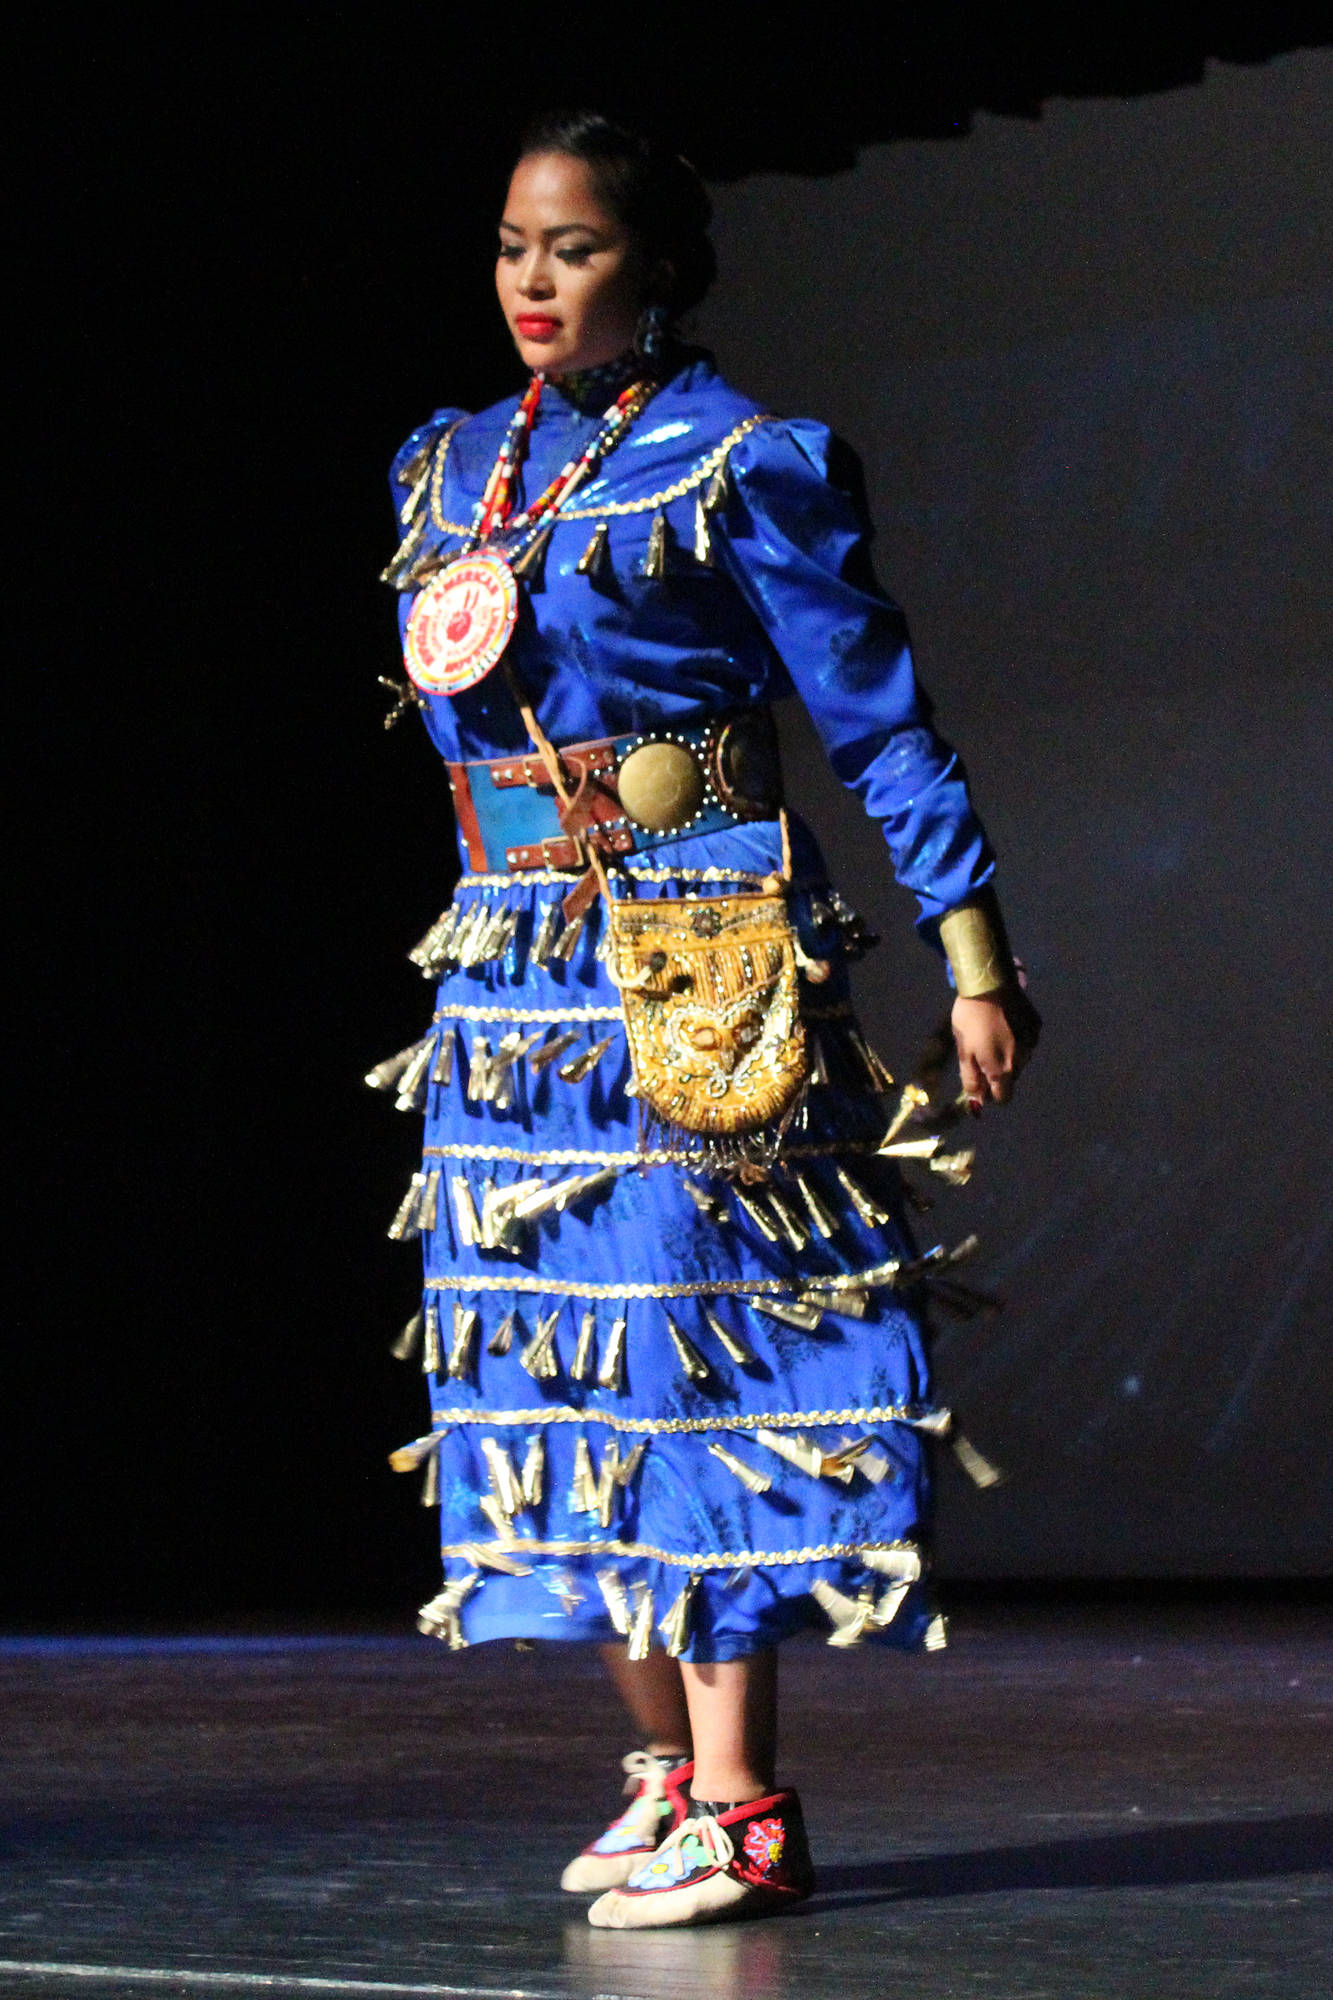 Sheena Cain performs the Anishinaabe side step in what’s called a Jingle Dress on Thursday, Sept. 6, 2018 in the Homer High School Mariner Theatre in Homer, Alaska. She is part of the group Native Pride Dancers that traveled from Minnesota for several performances on the Kenai Peninsula. (Photo by Megan Pacer/Homer News)